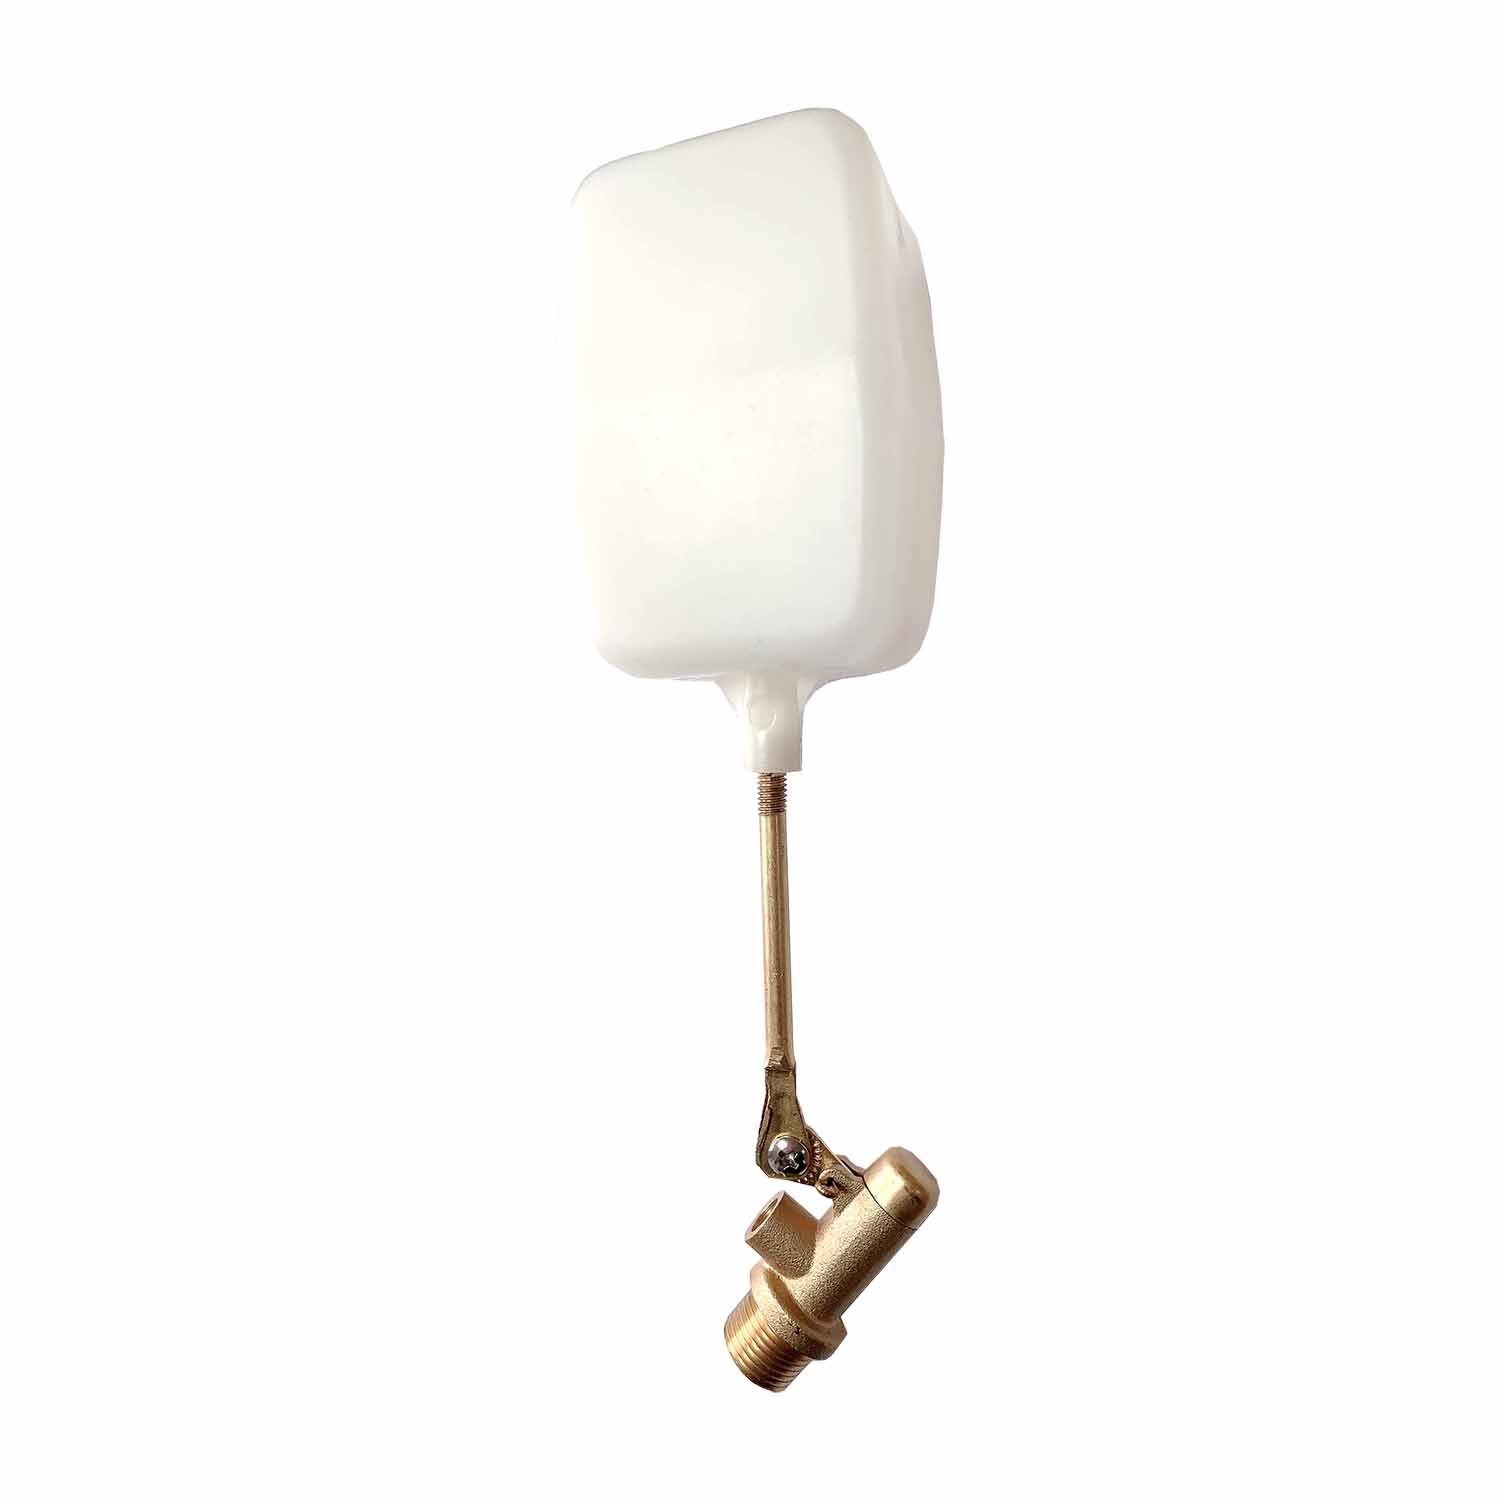 Brass float valve with plastic ball for water tank